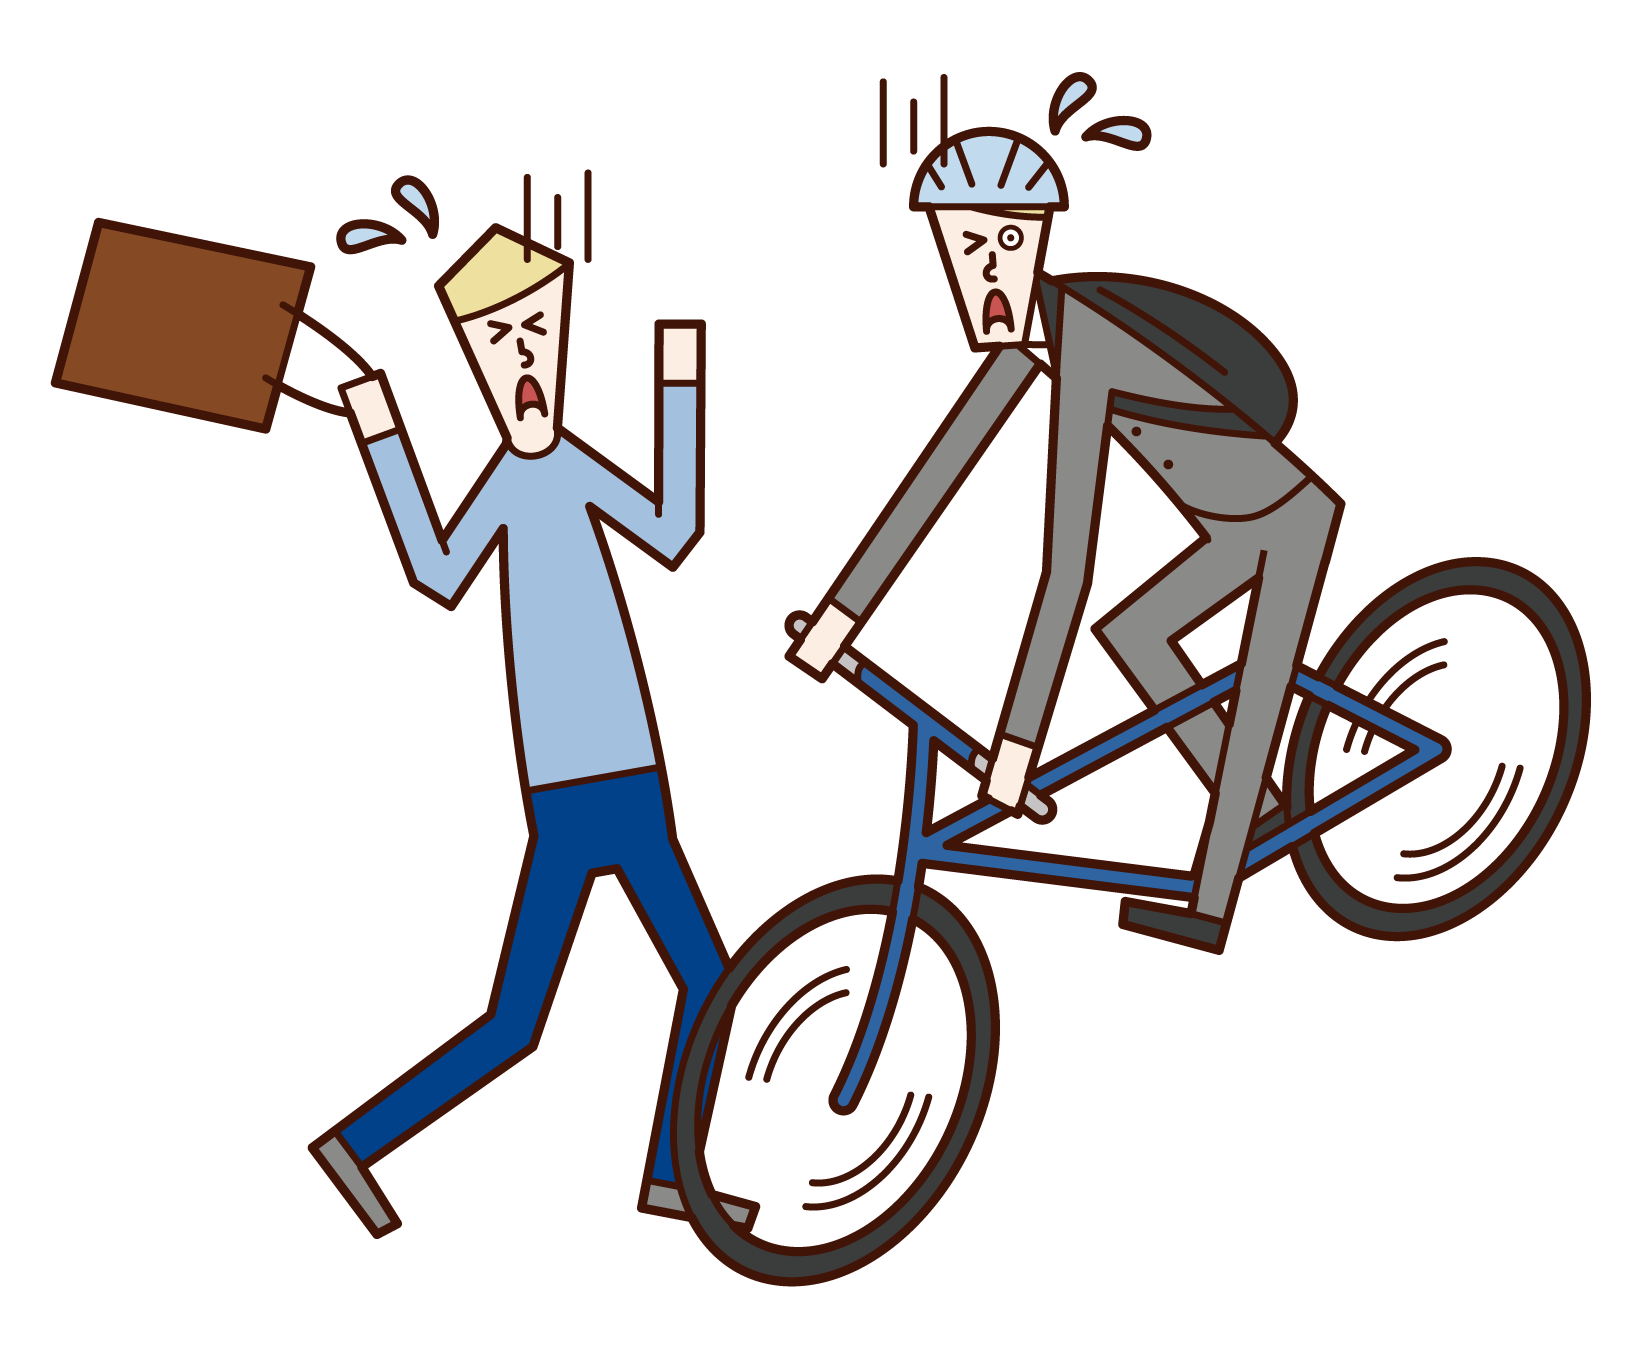 Illustration of a man who causes a crash on a bicycle